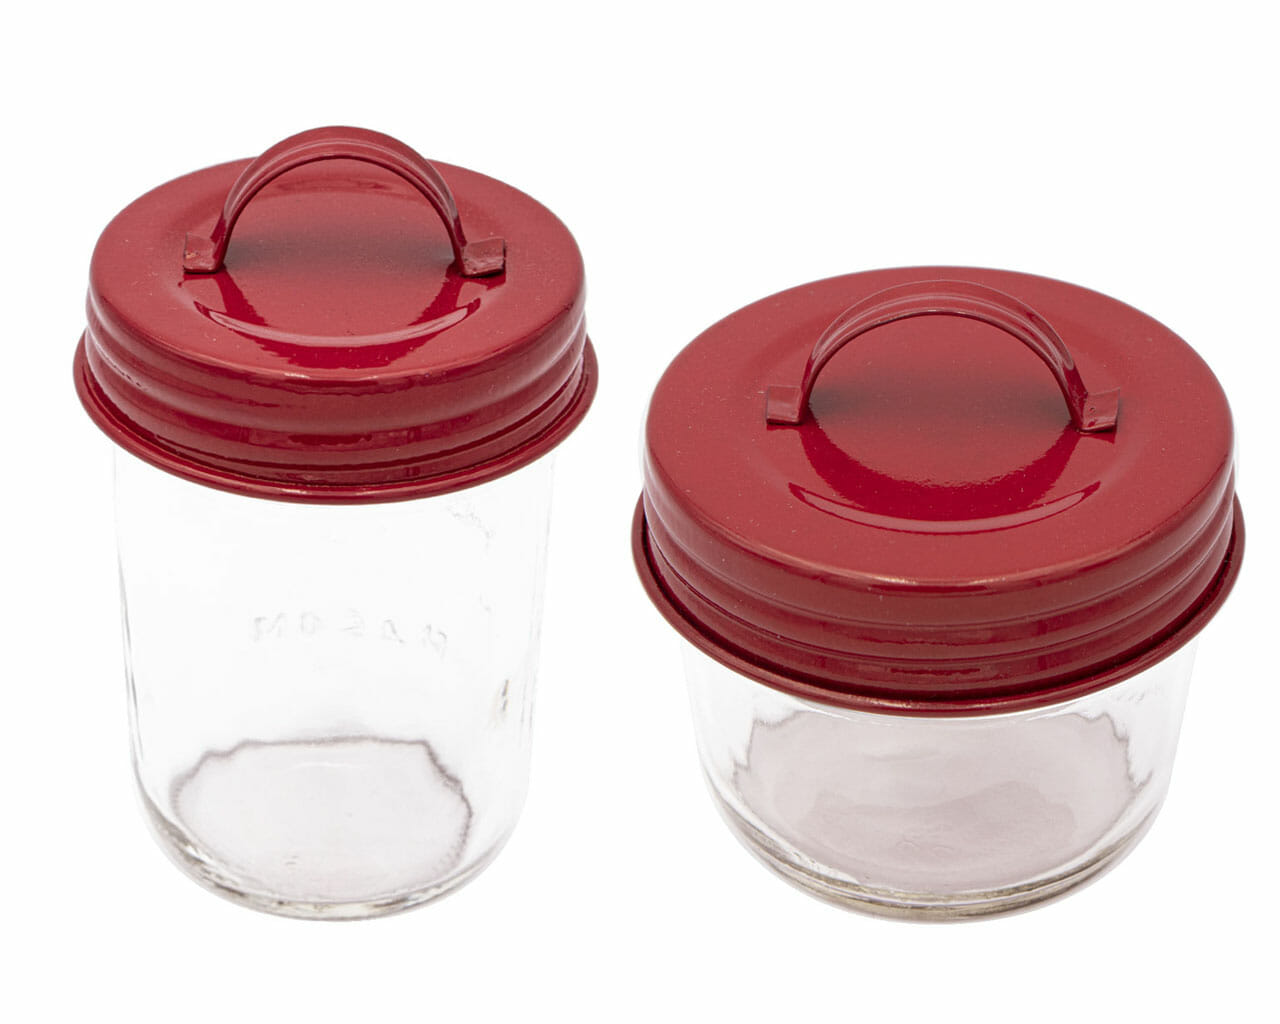 4 Pack Set of 4 Plastic Mason Jars with Handles, Lids and Straws